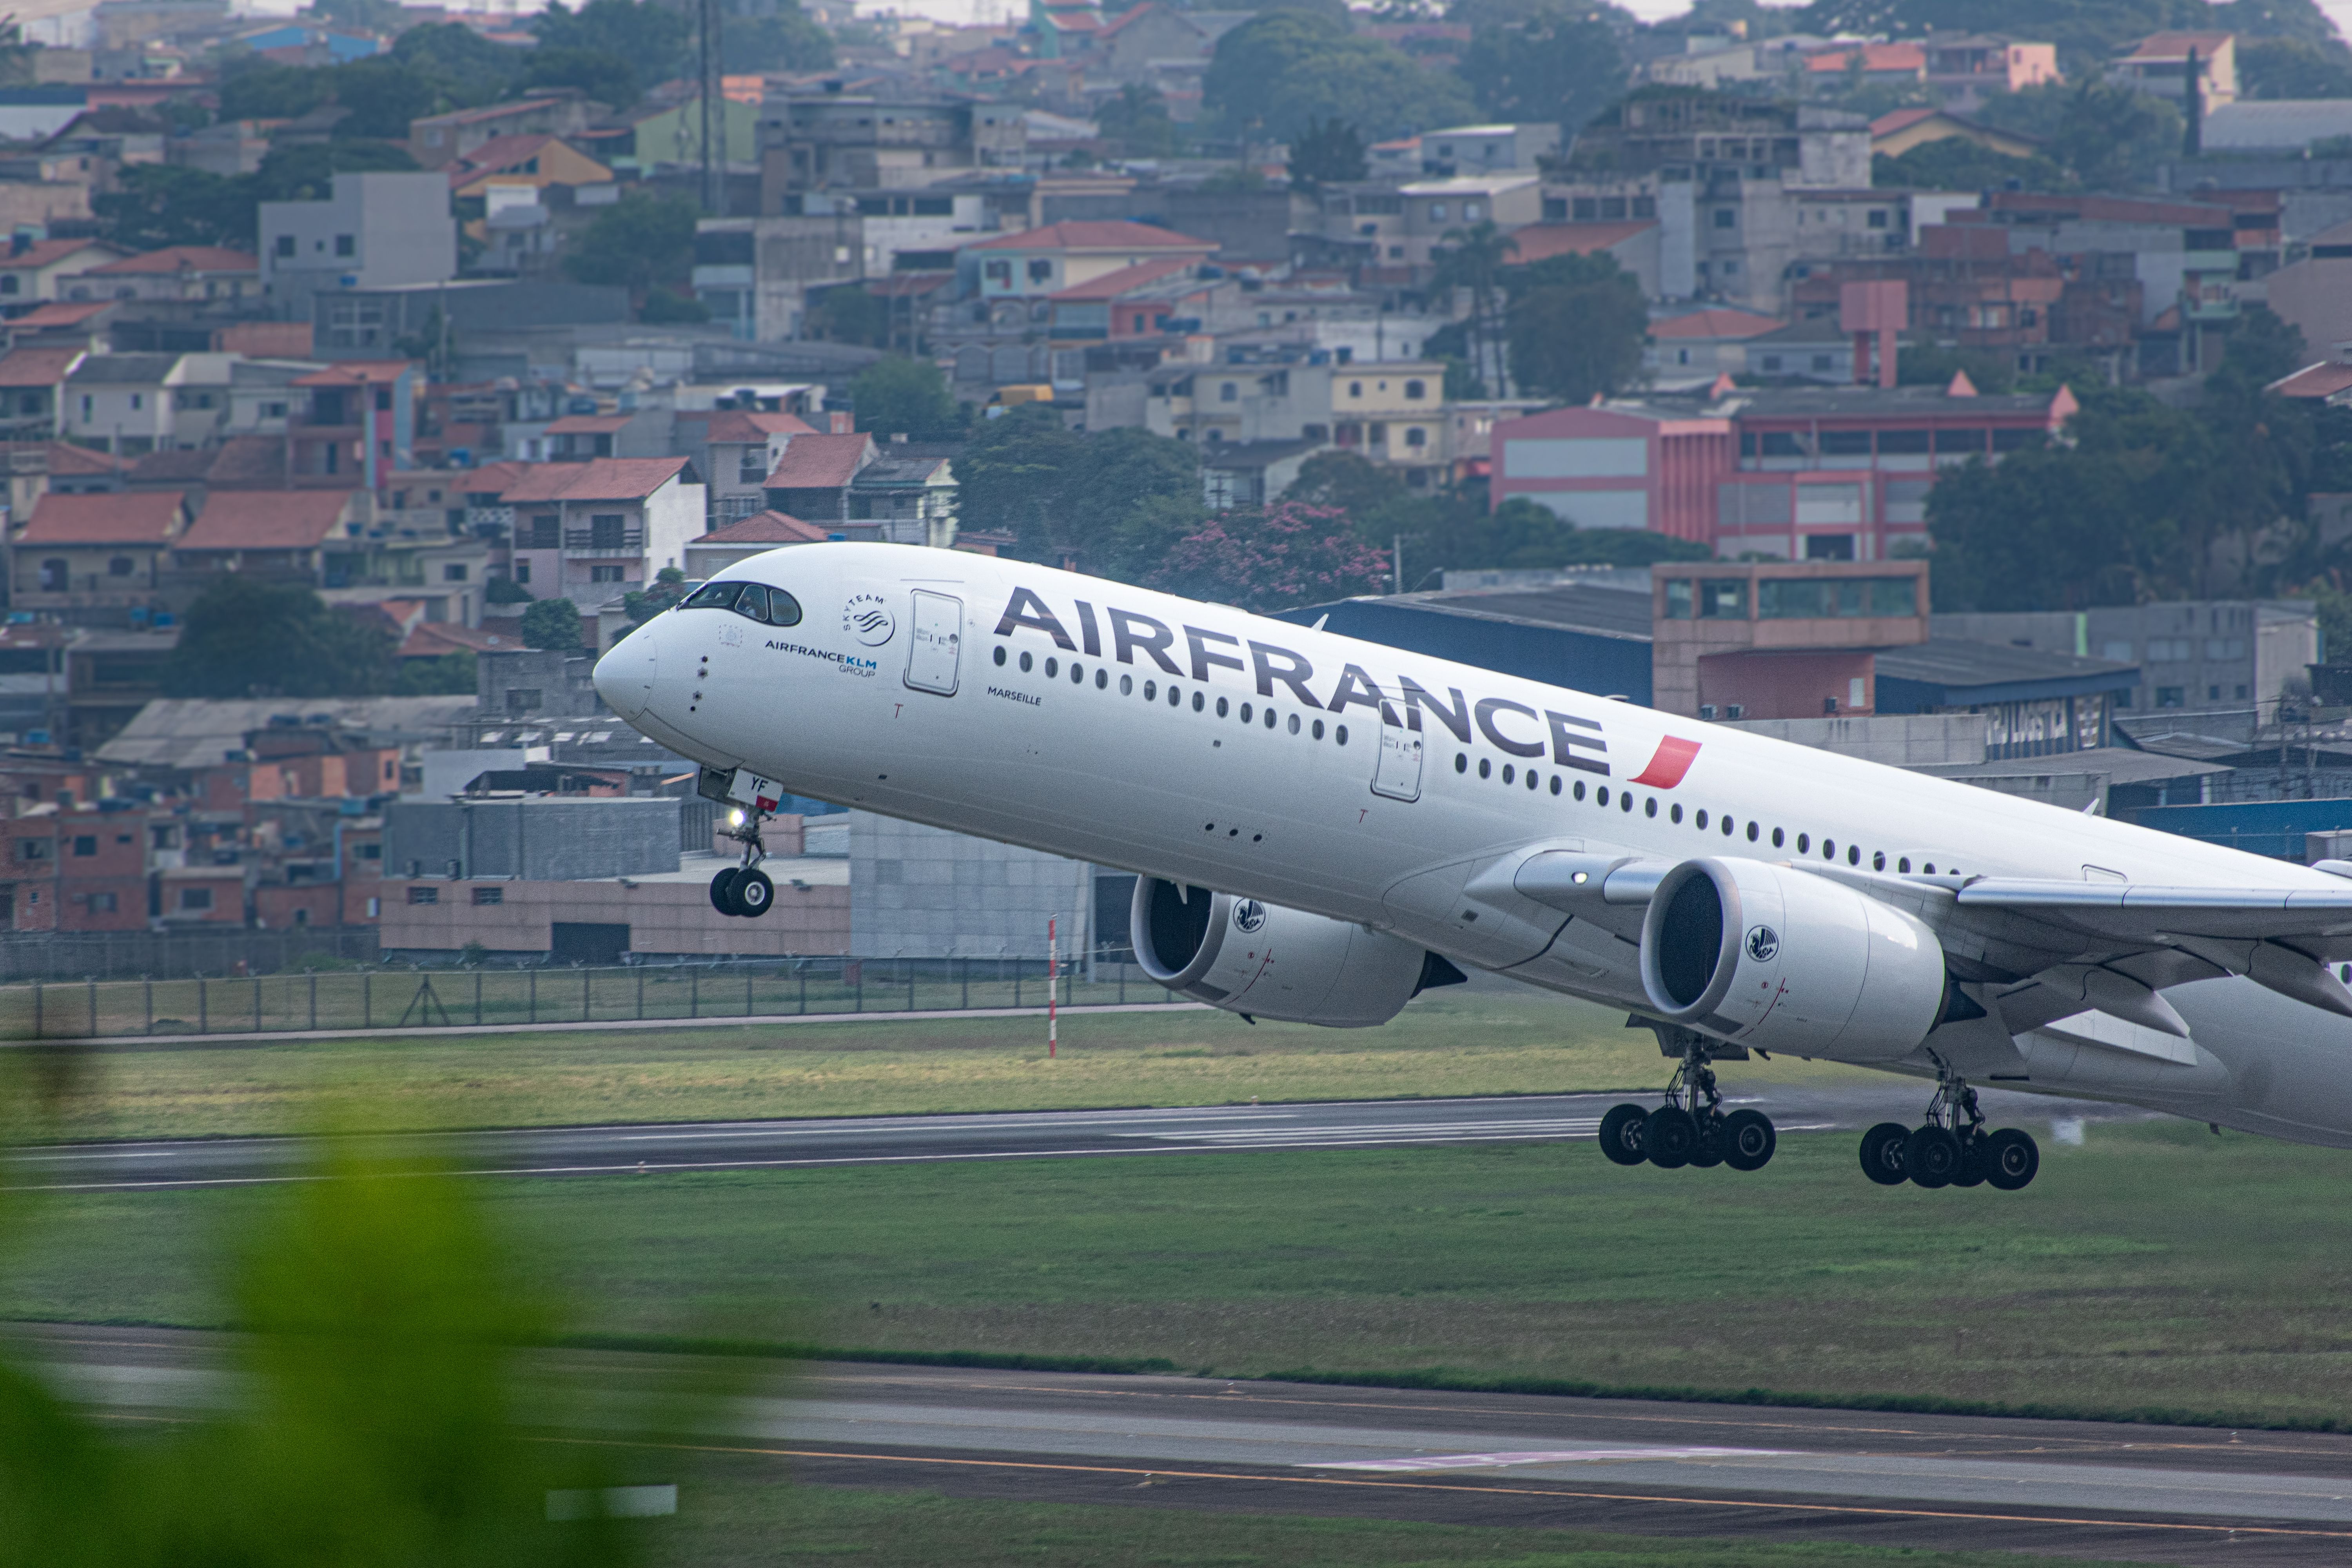 Air France Airbus A350 taking off at GRU